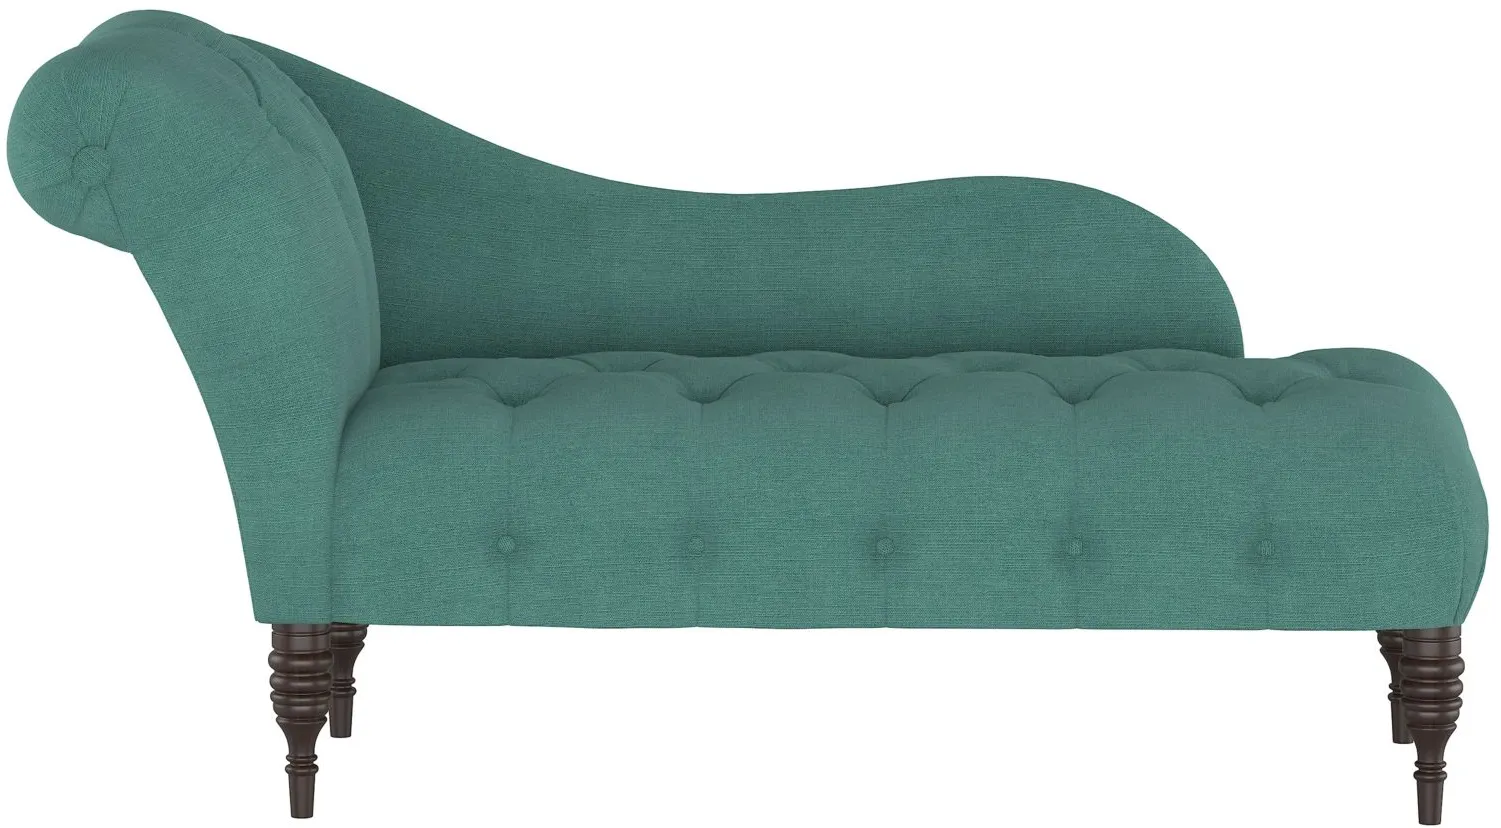 Opulence Chaise Lounge in Linen Laguna by Skyline